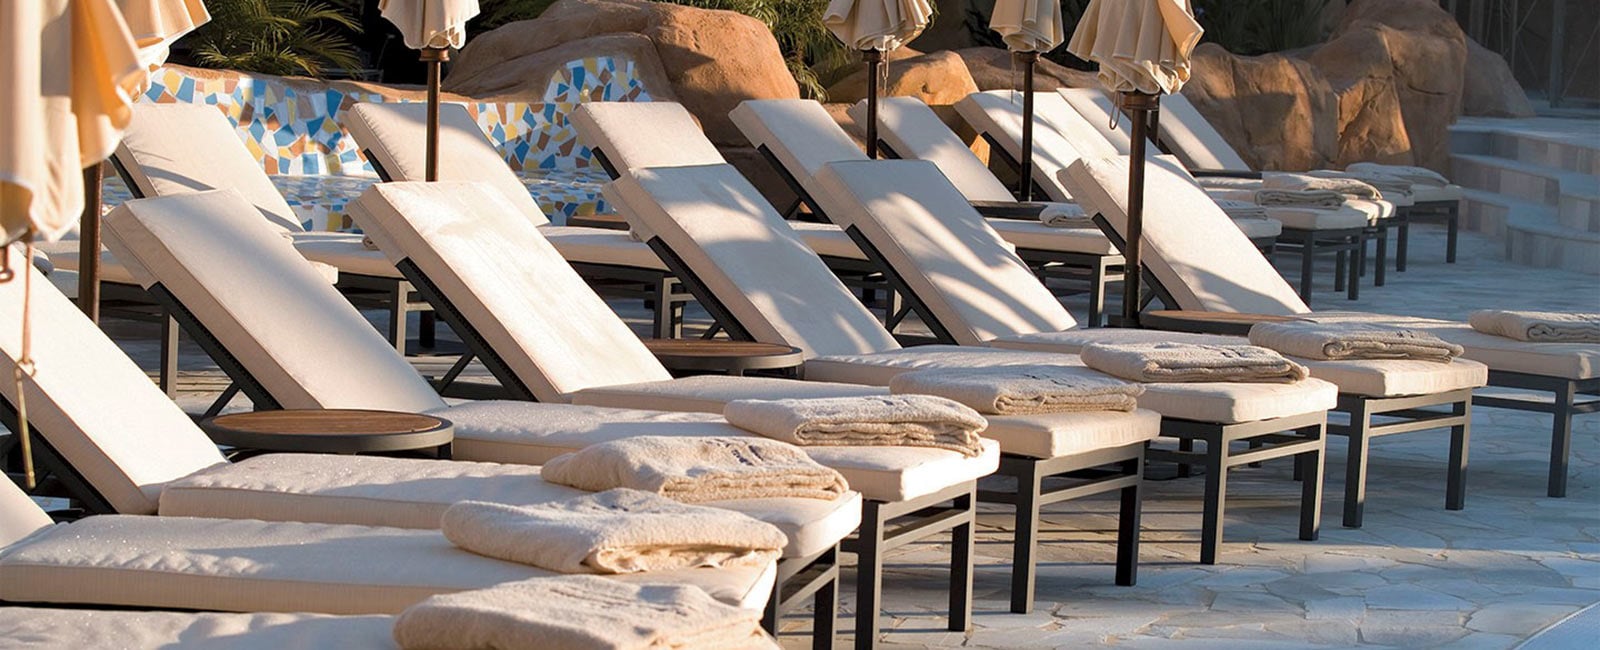 Lounge Chairs at Hilton Vilamoura Vacation Club in Vilamoura, Portugal